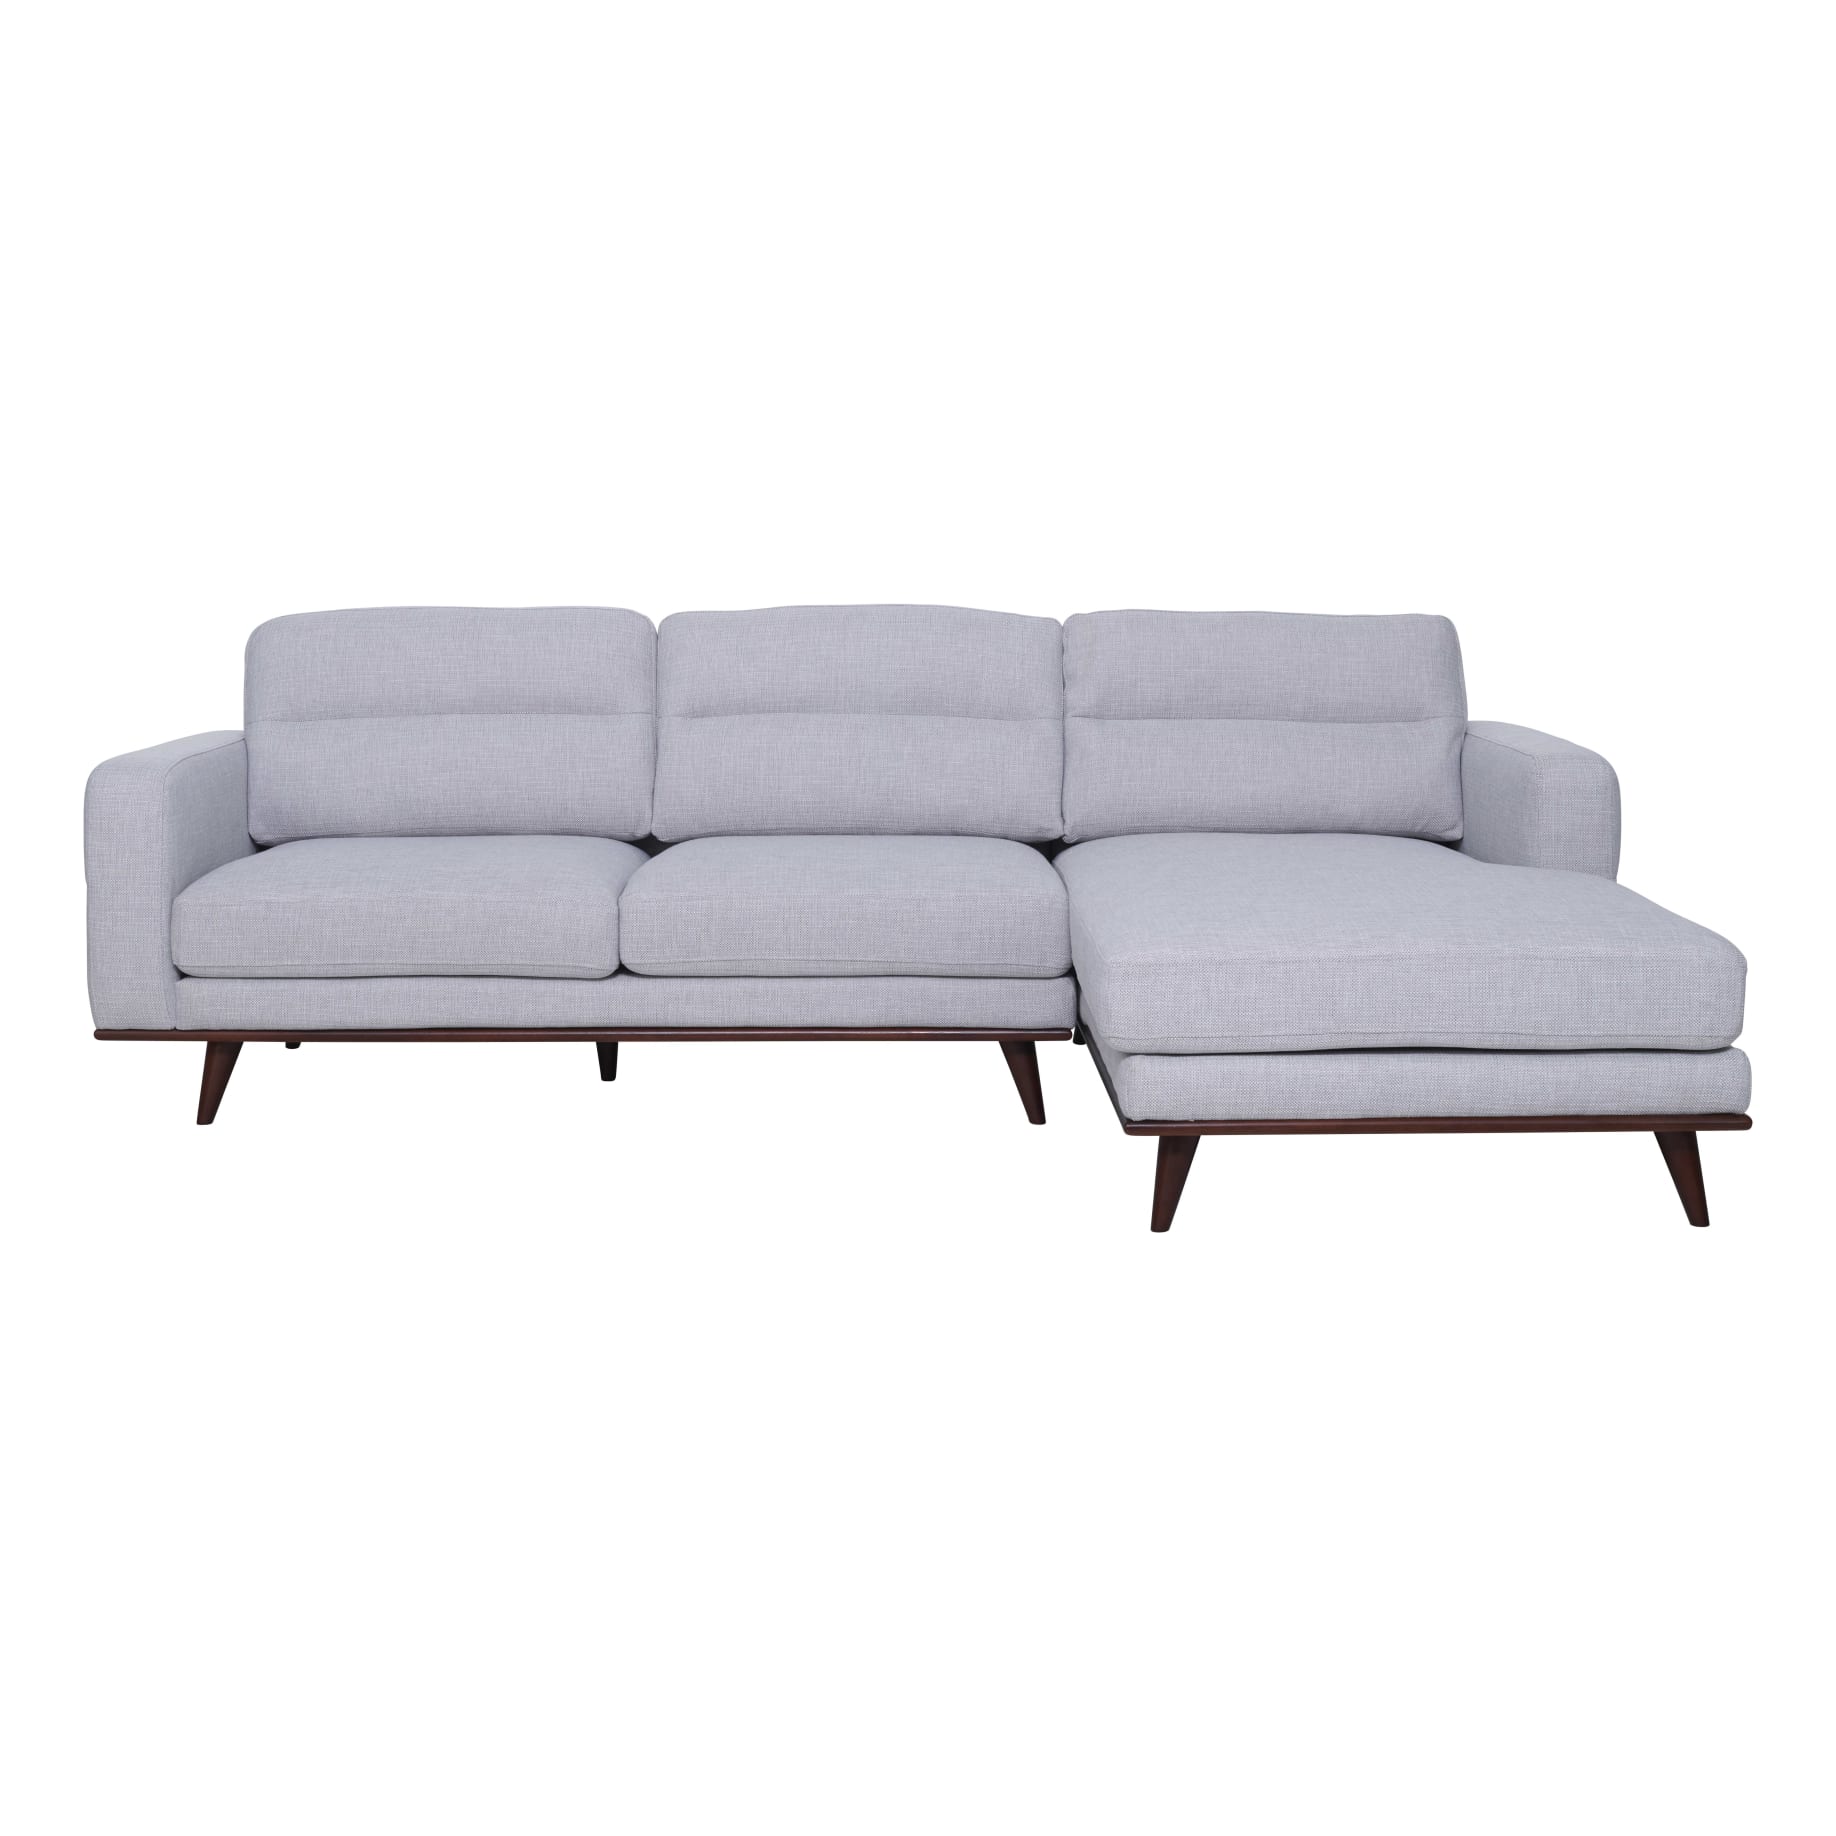 Astrid 2.5 Seater Sofa + Chaise RHF in Talent Silver